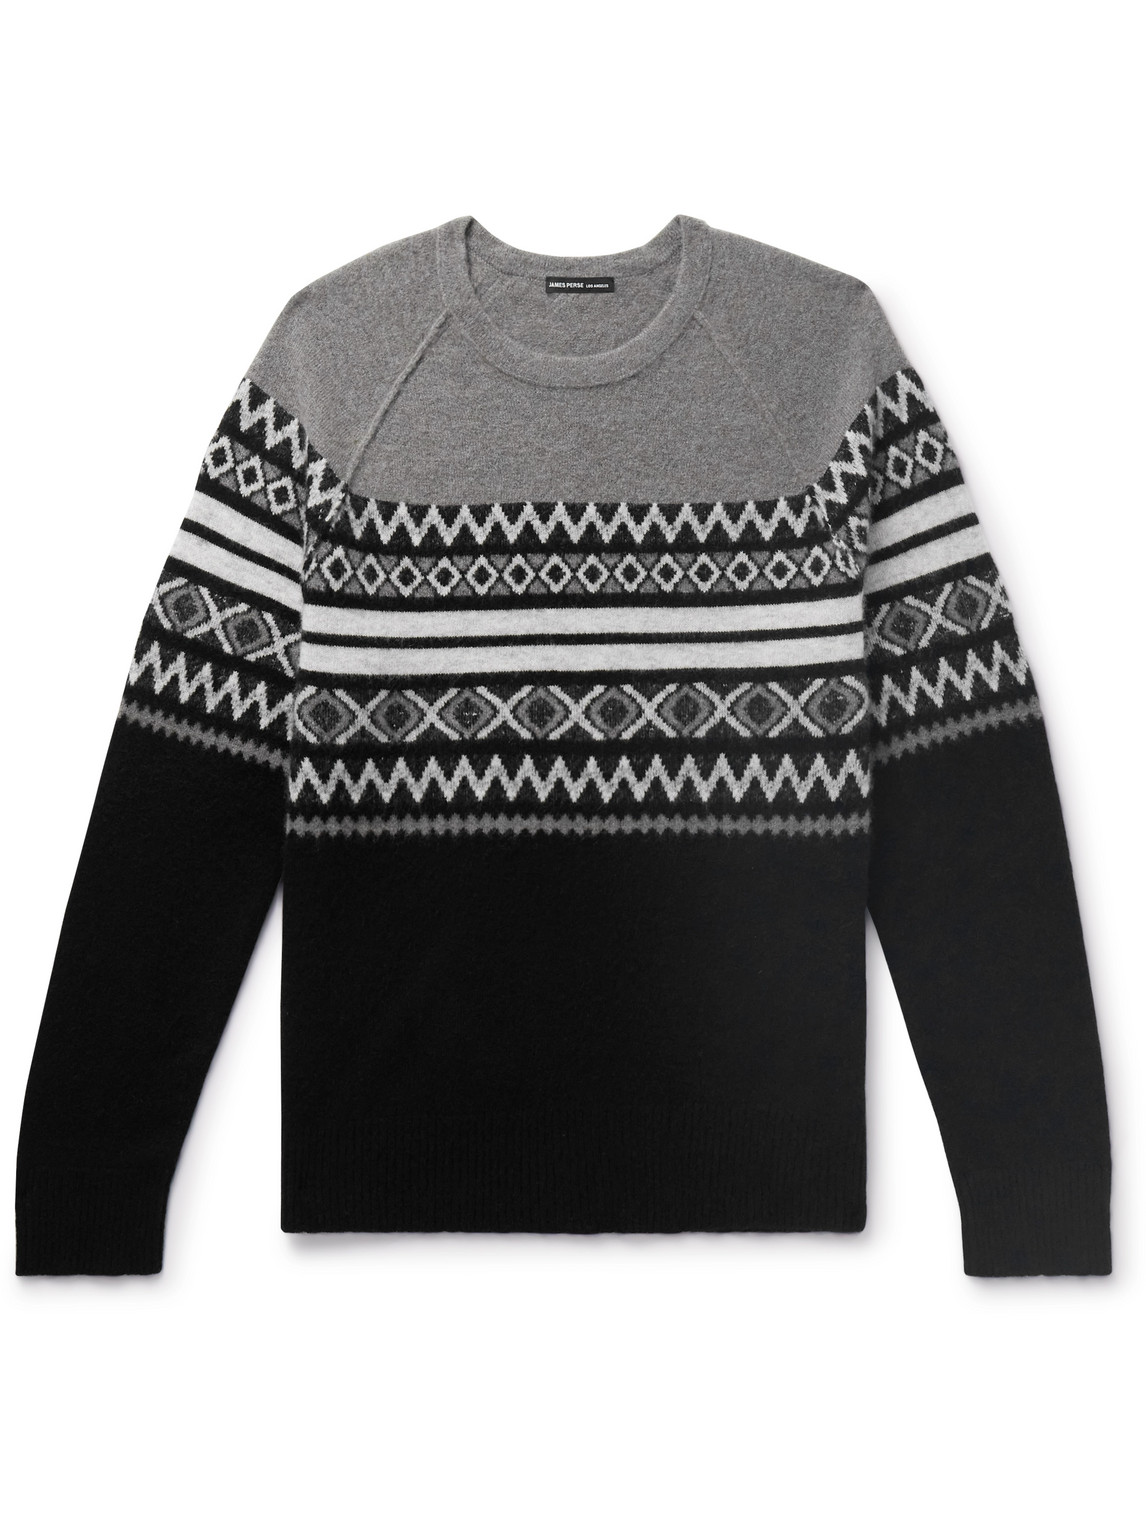 James Perse Fair Isle Cashmere And Cotton-blend Sweater In Gray